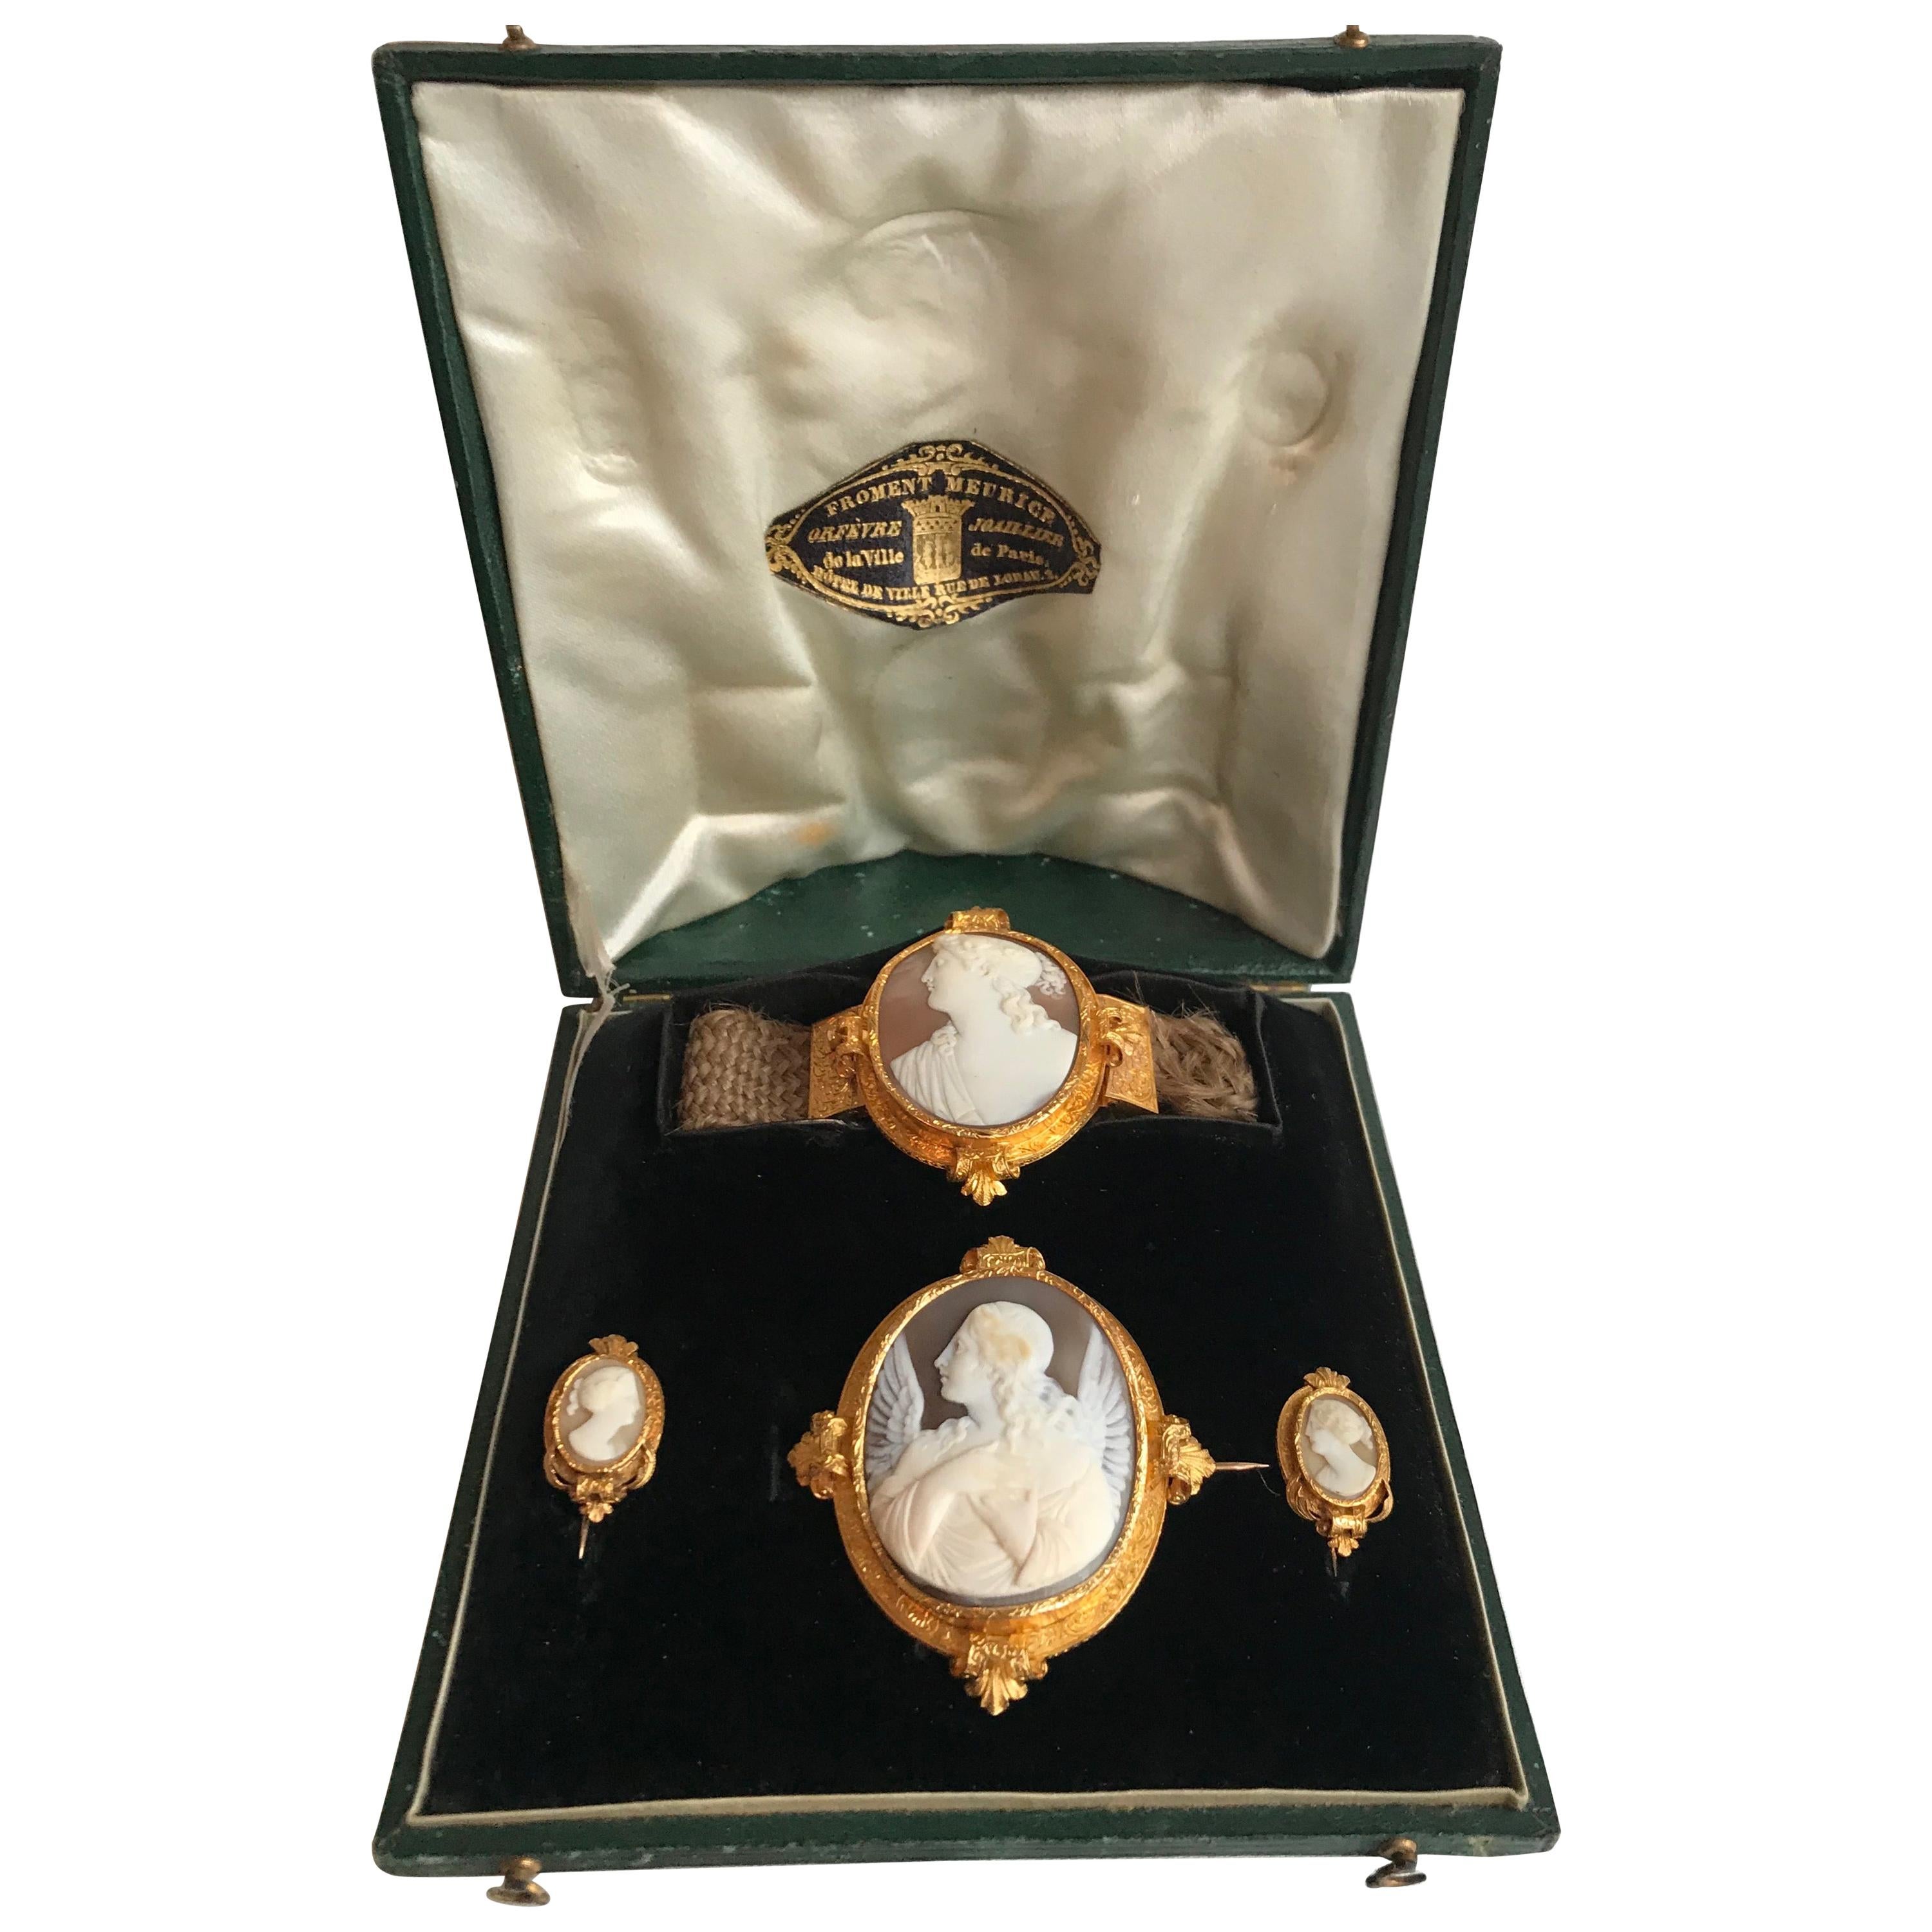  Froment-Meurice Set in 18 Carat, Yellow Gold and Cameo, 19th Century